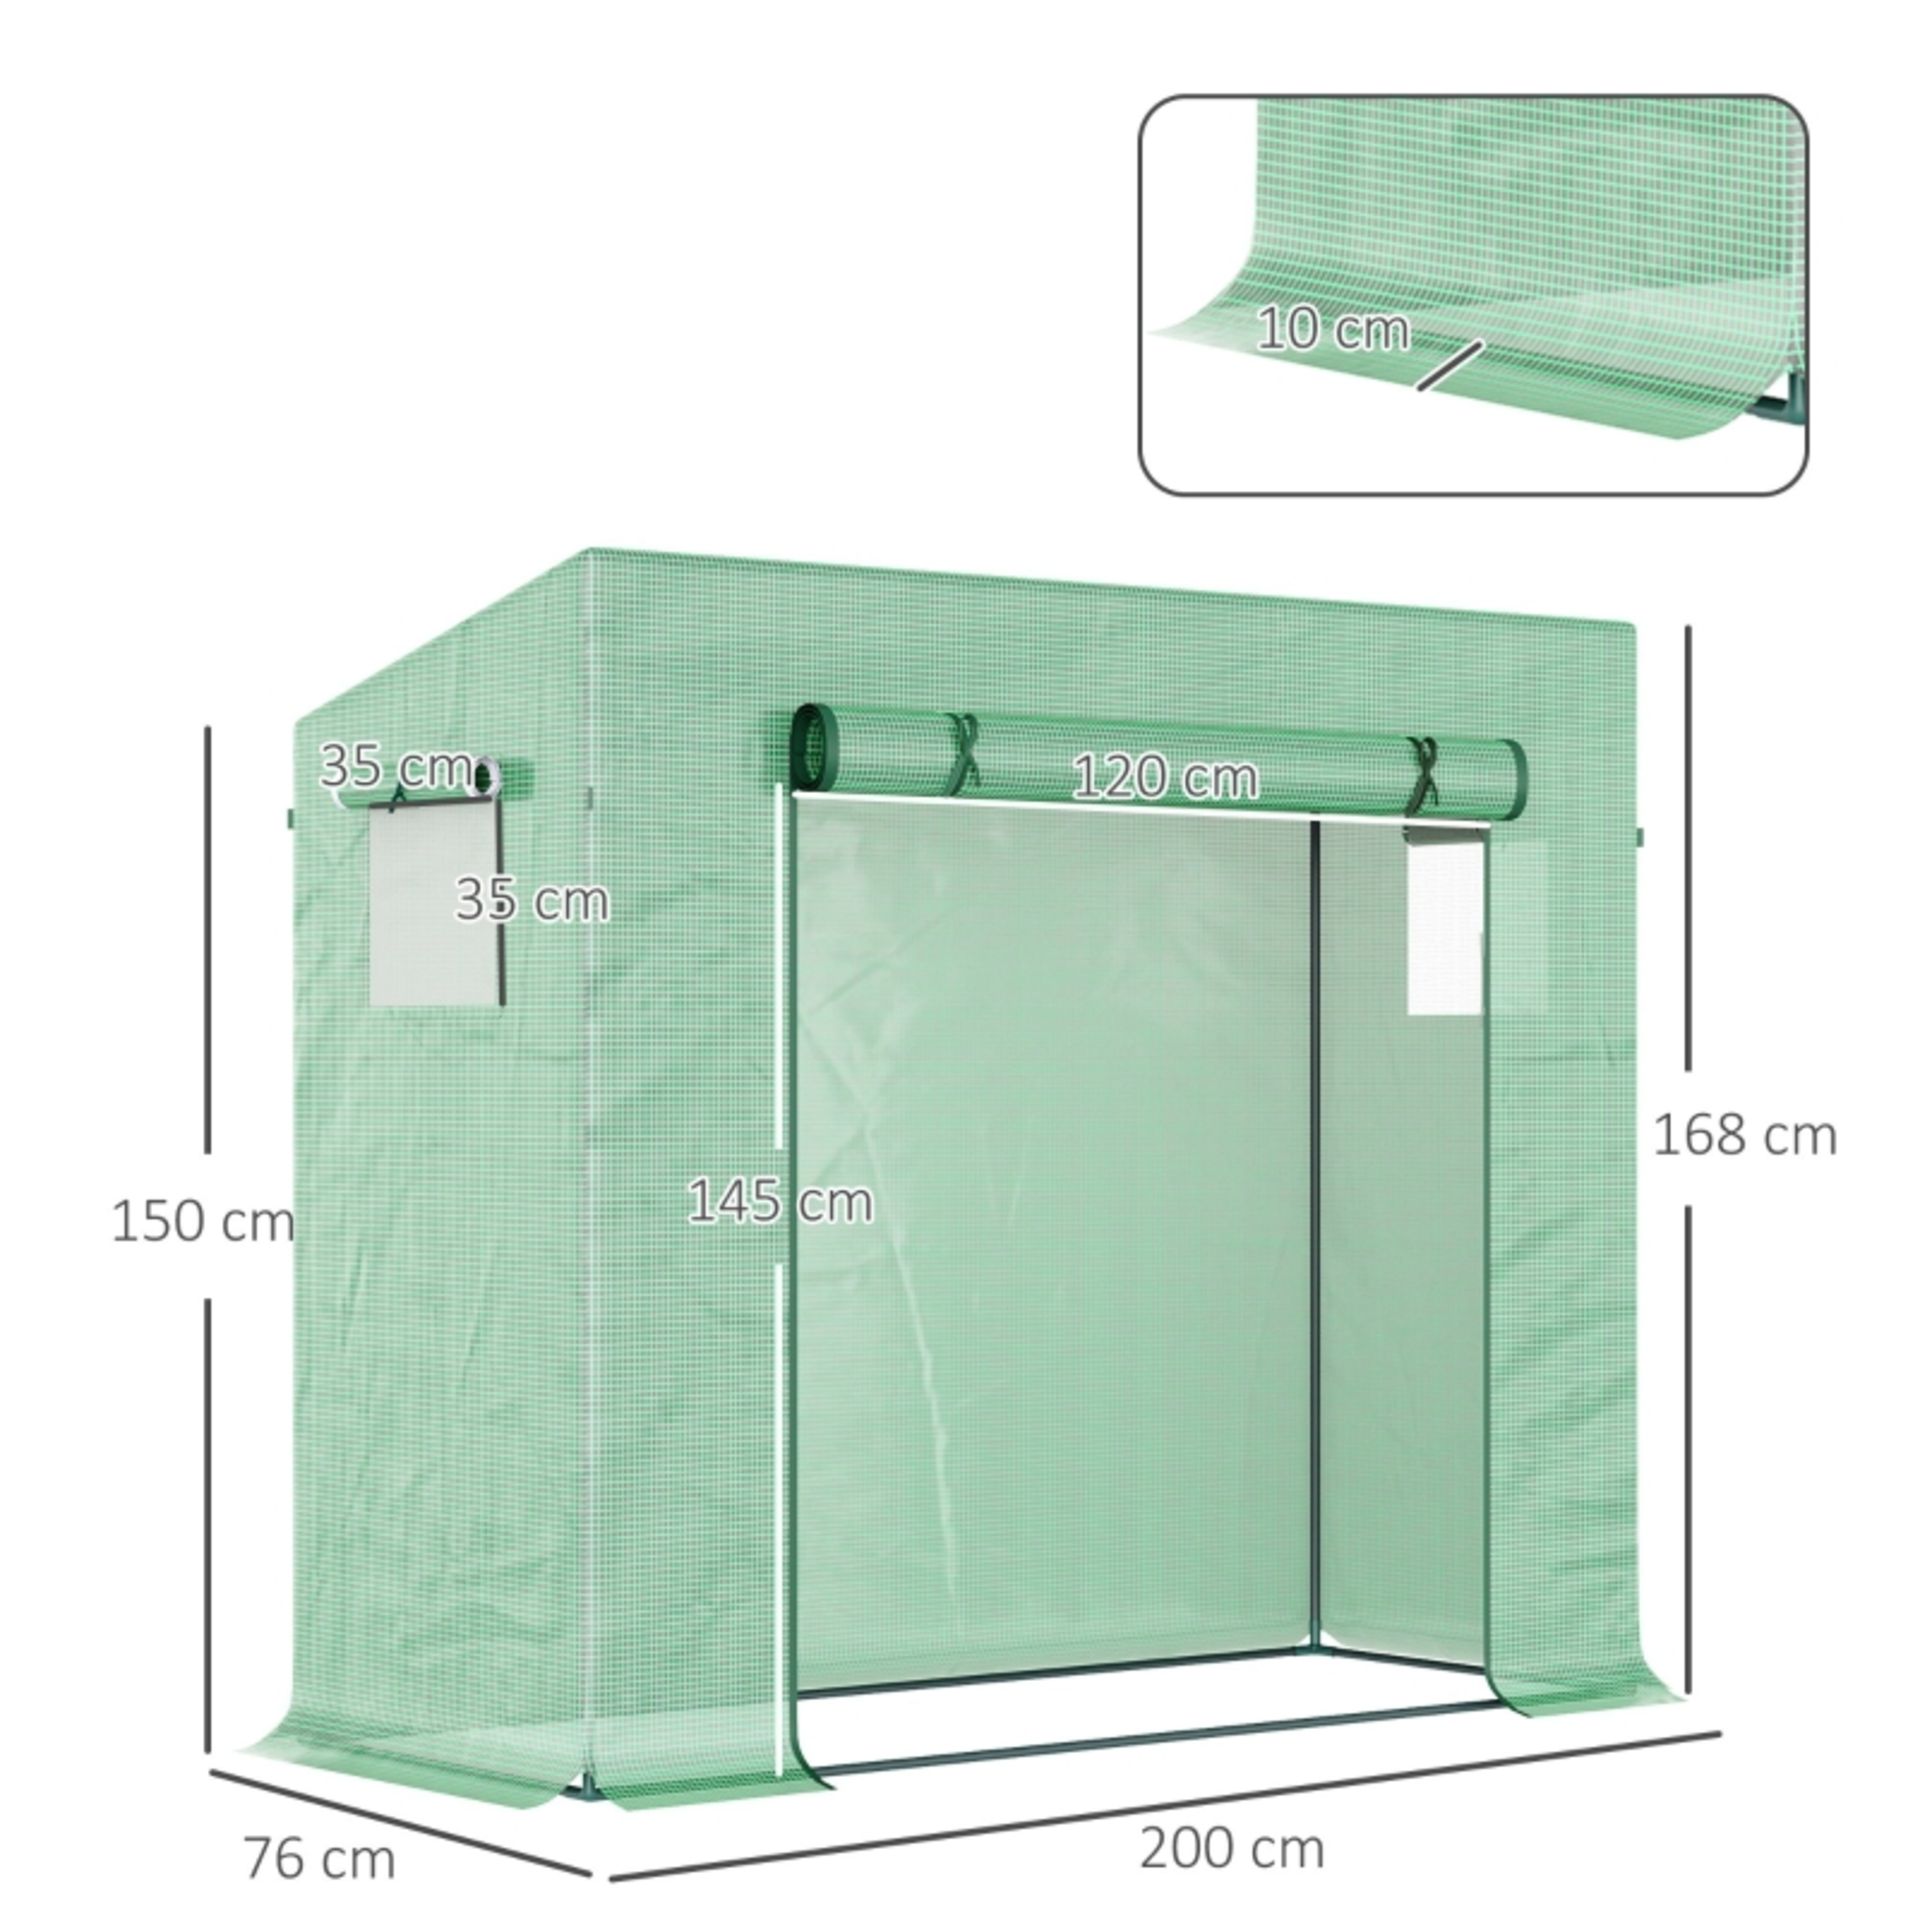 RPP £335.99 -Outsunny Outdoor Greenhouse Poly Tunnel Plants Reinforced Top Cover 1.98 X 0.77 X 1. - Image 3 of 5